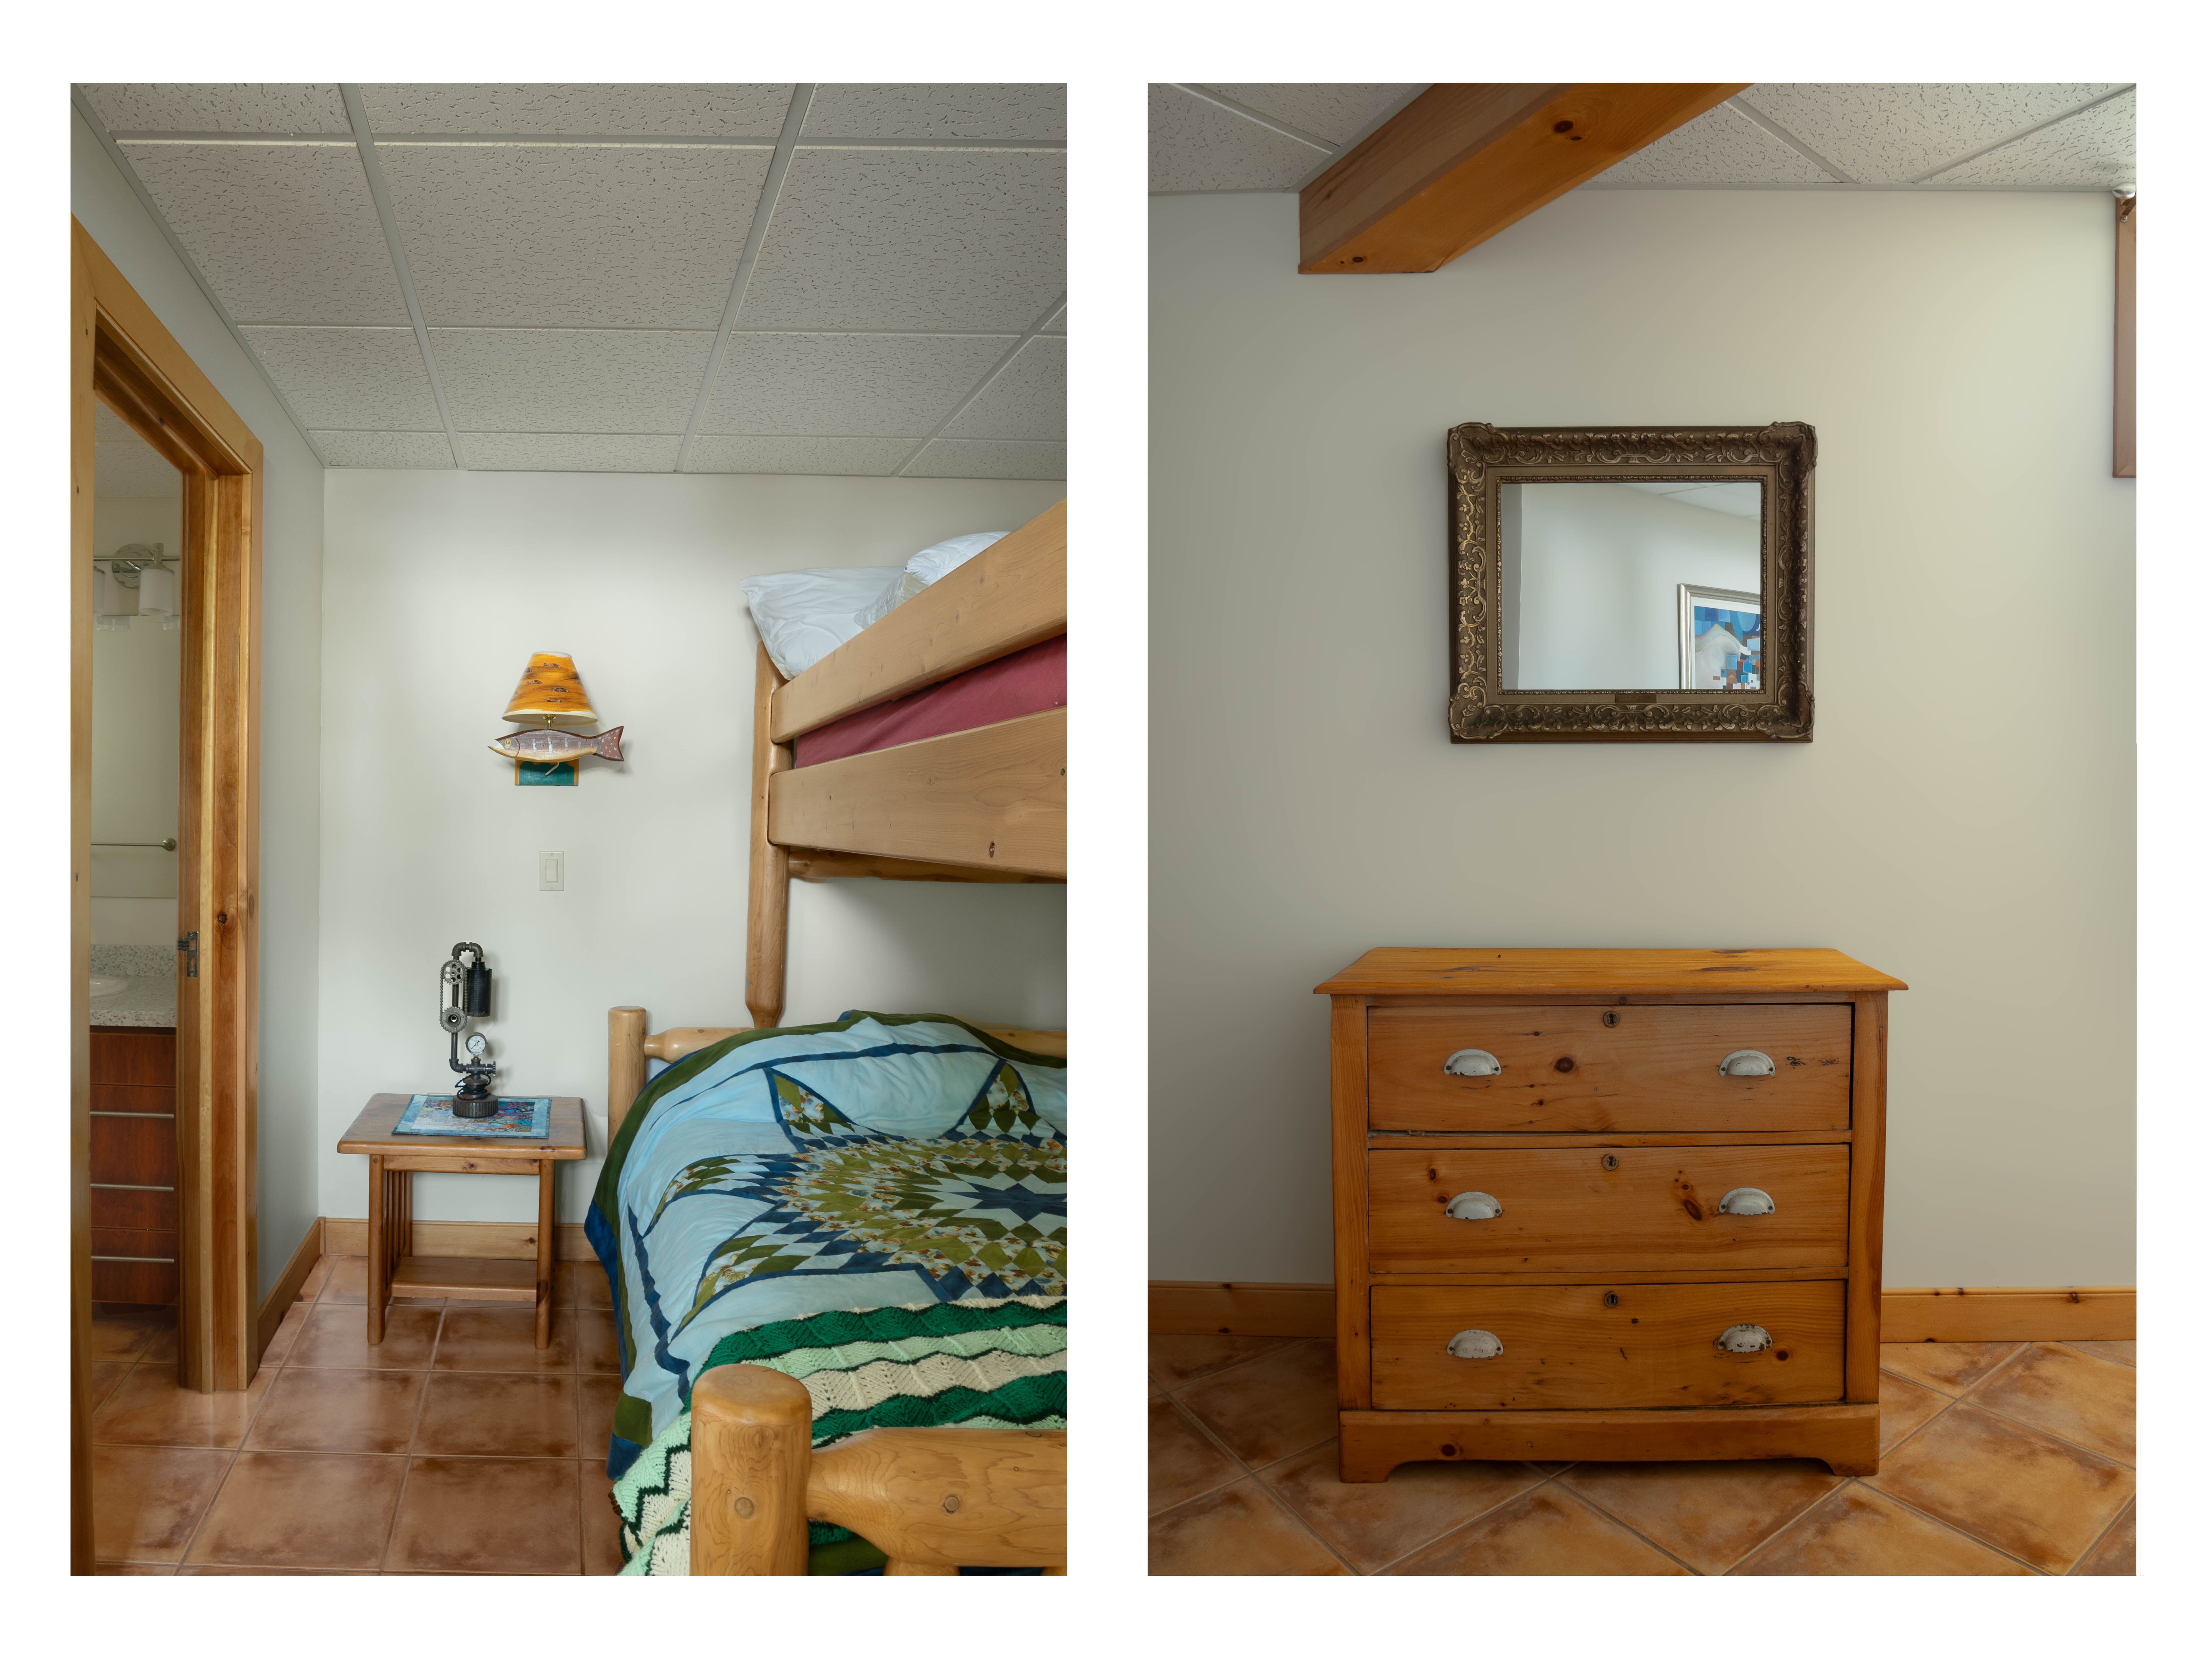 Two images. One shows bunk beds with a small side table, and one shows a small wooden dresser, in the same room.